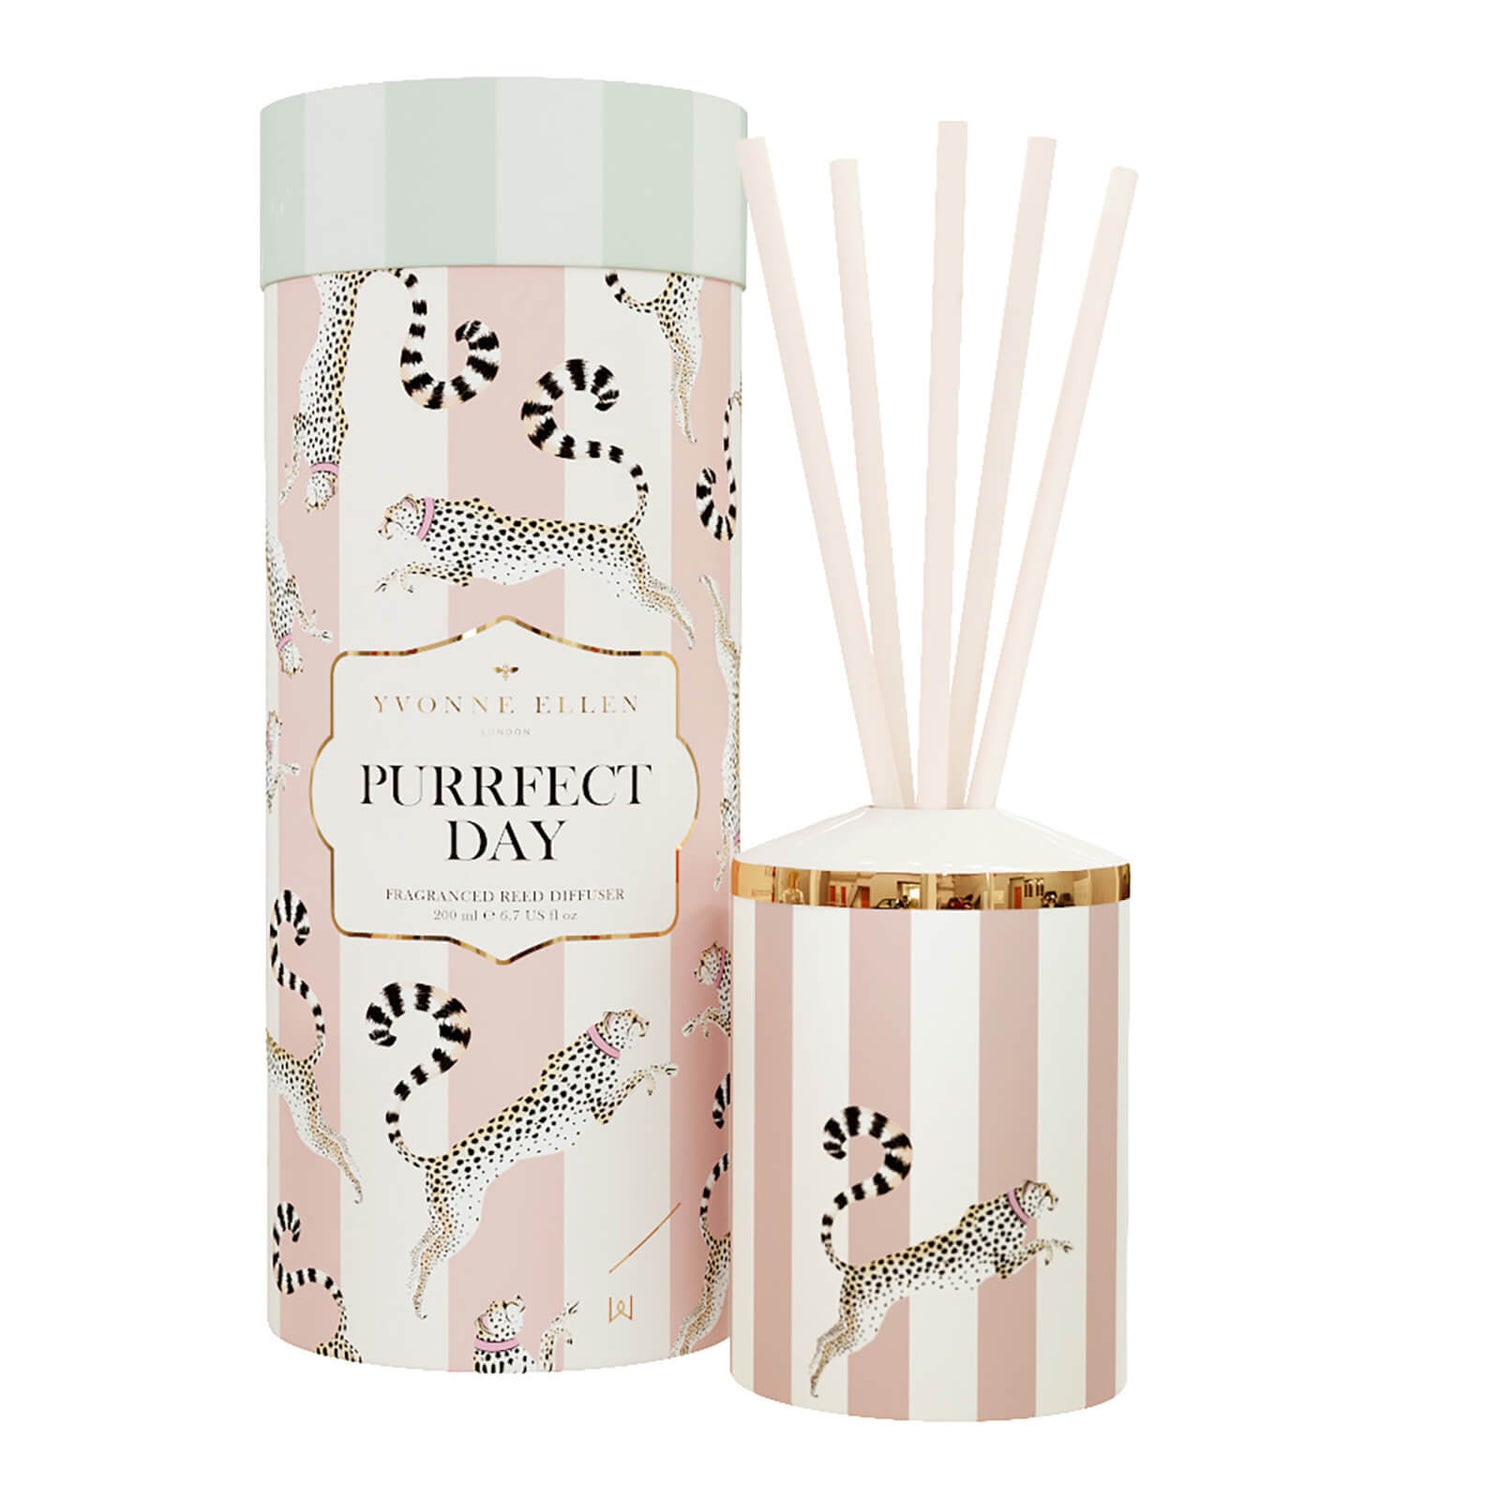 Yvonne Ellen Puurfect Day Scented Diffuser - Rose & Oudh